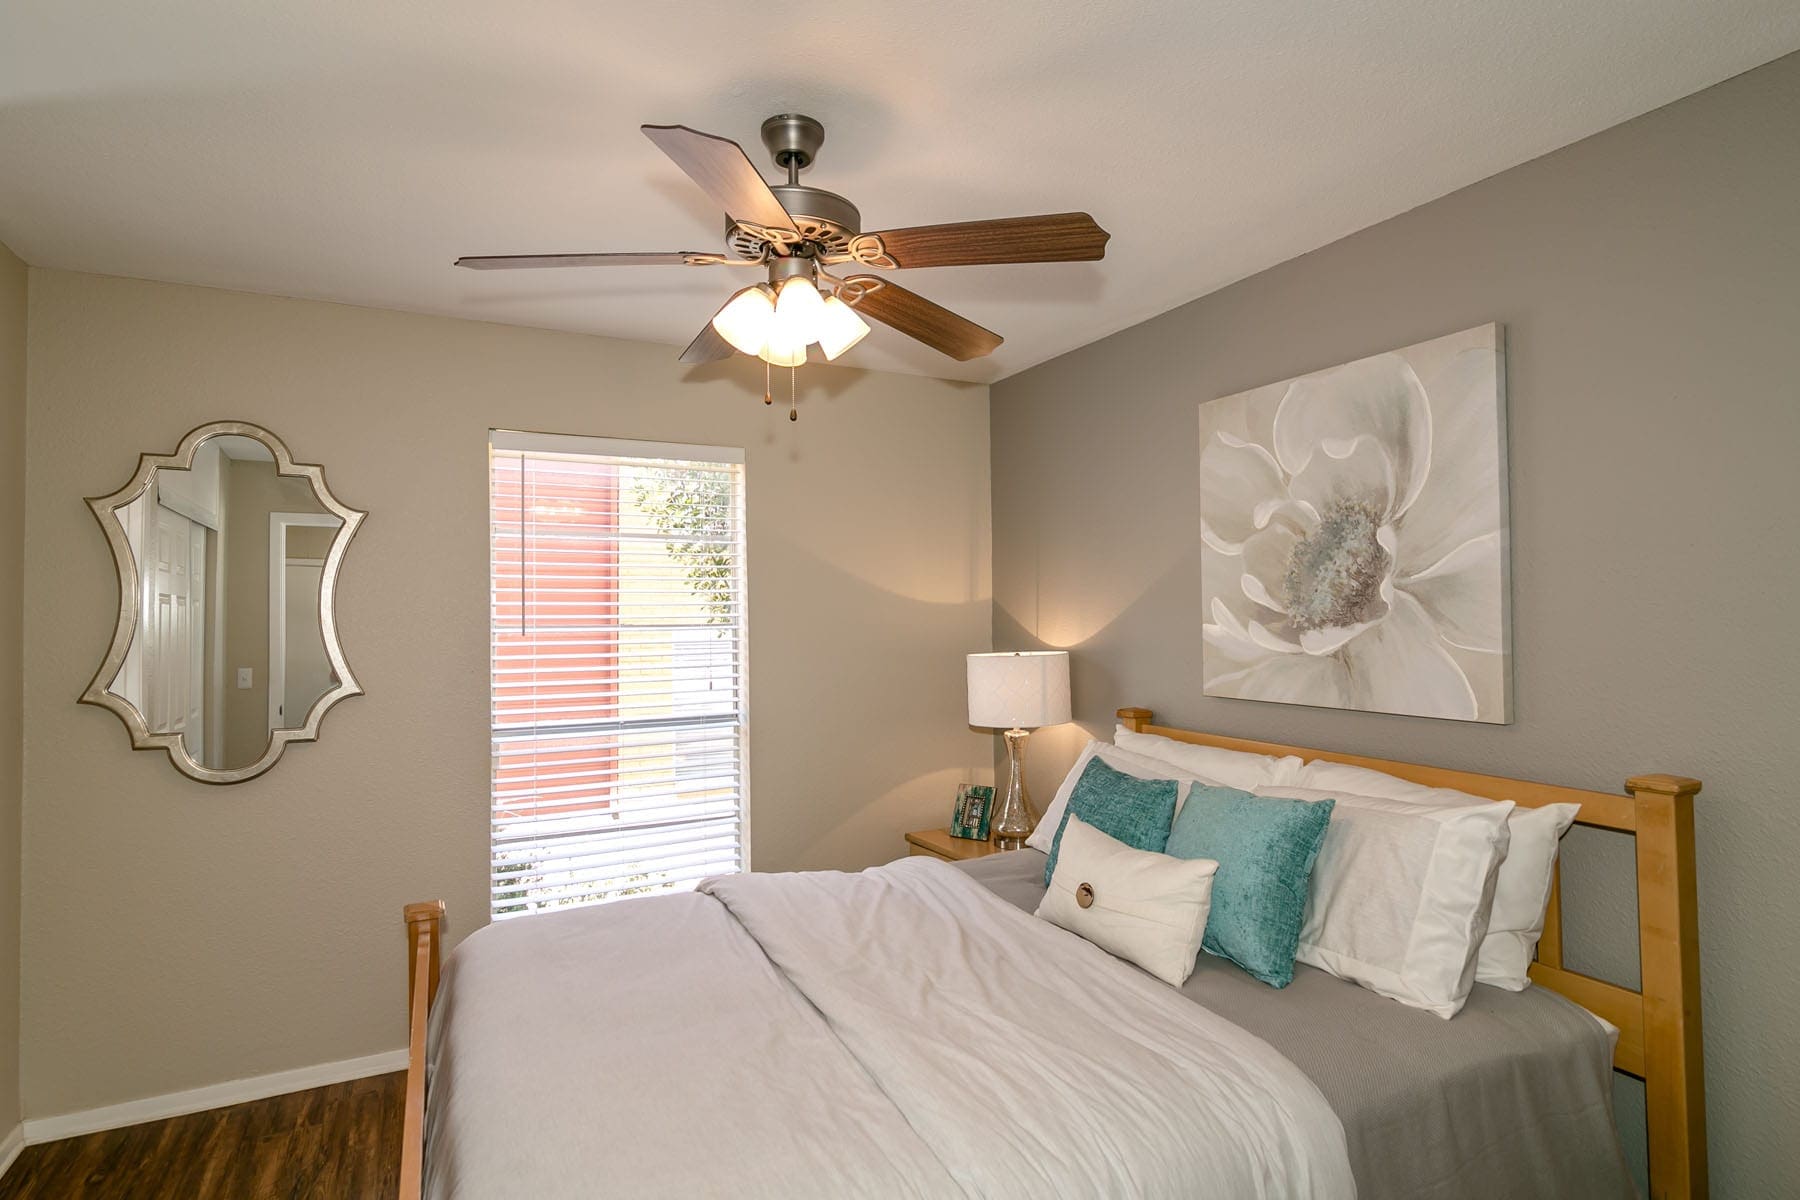 Two Bedroom Apartments in San Antonio, TX - City-Base Vista Bedroom with Wood-Style Plank Flooring and Cooling Ceiling Fan